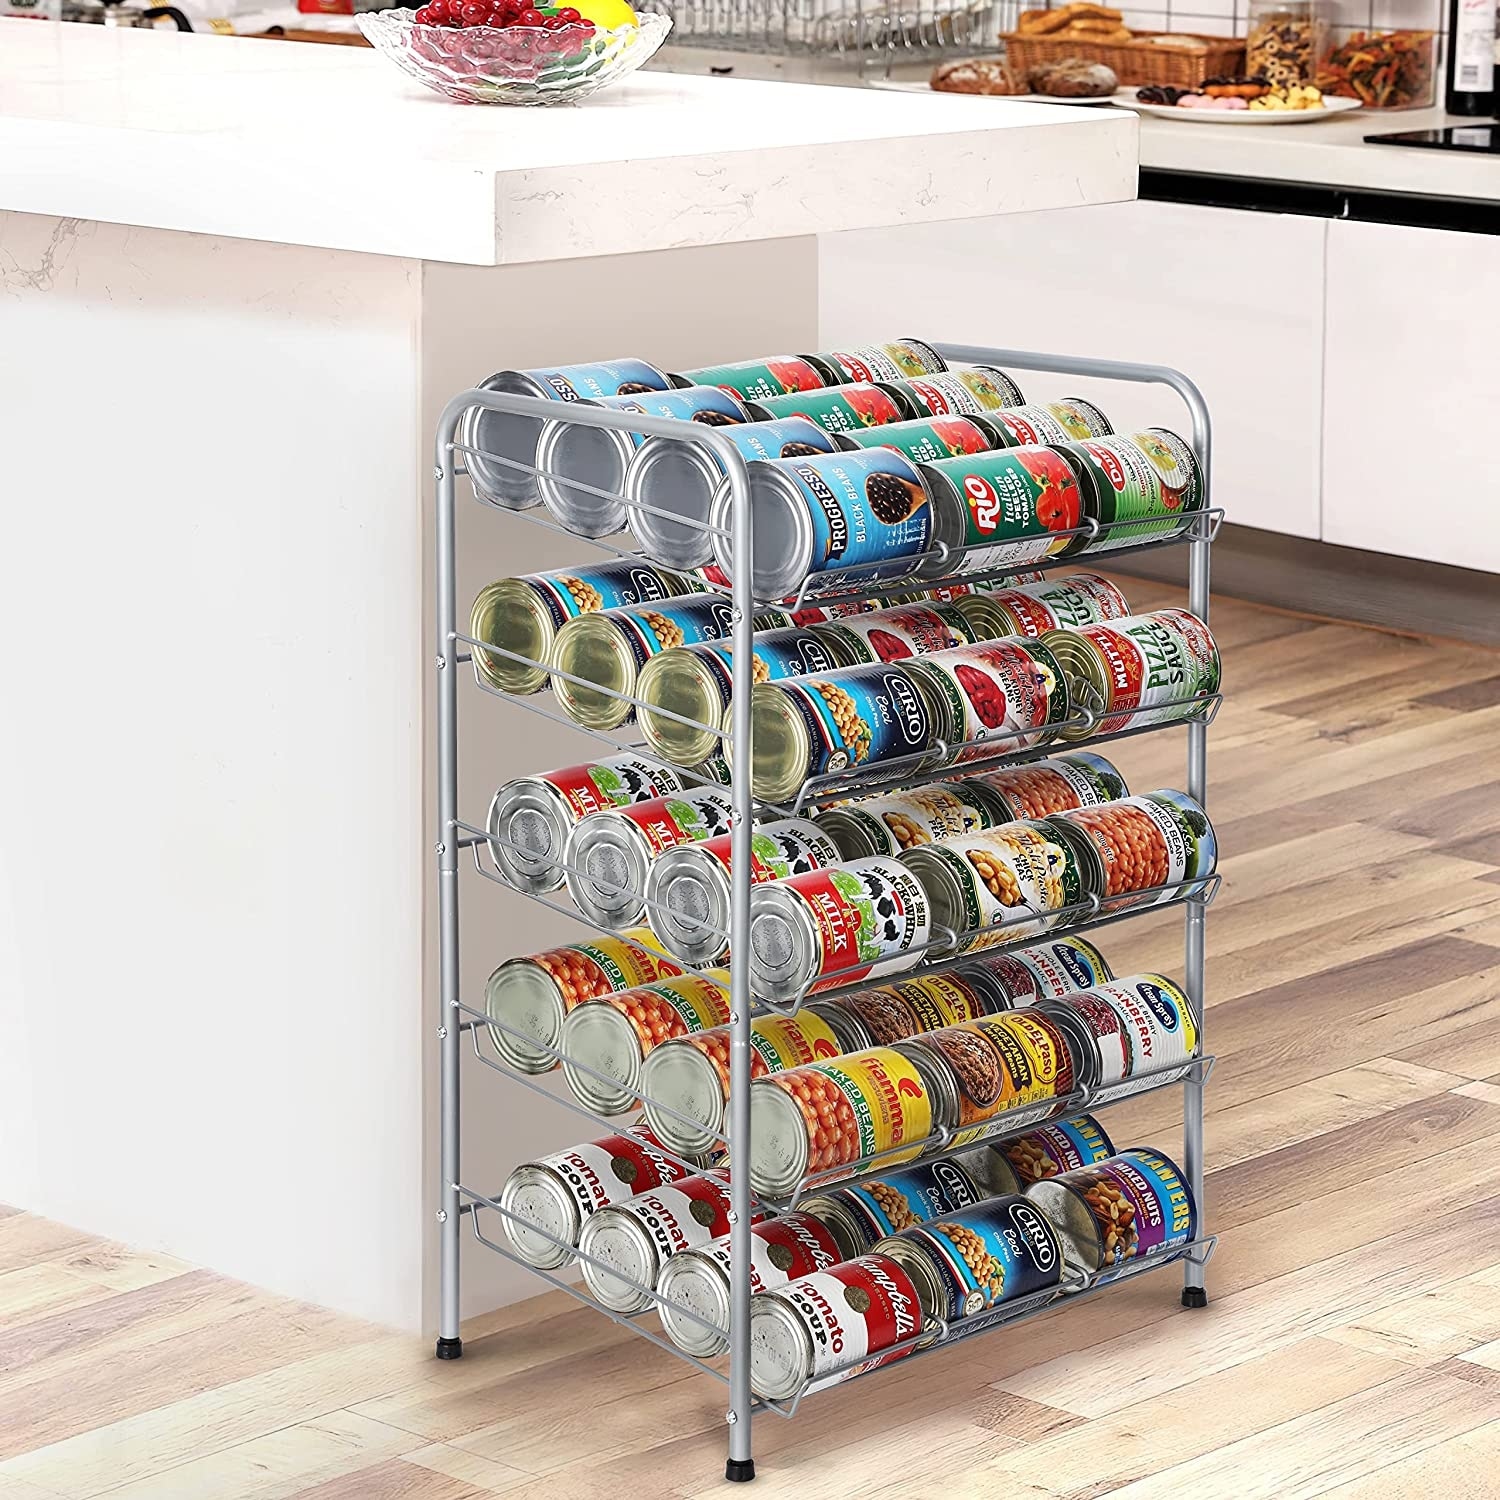 https://ak1.ostkcdn.com/images/products/is/images/direct/4390a8b9c6c8b7fc3313b671d8708a30631b681d/Can-Organizer-Can-Good-Organizer-for-Pantry.jpg